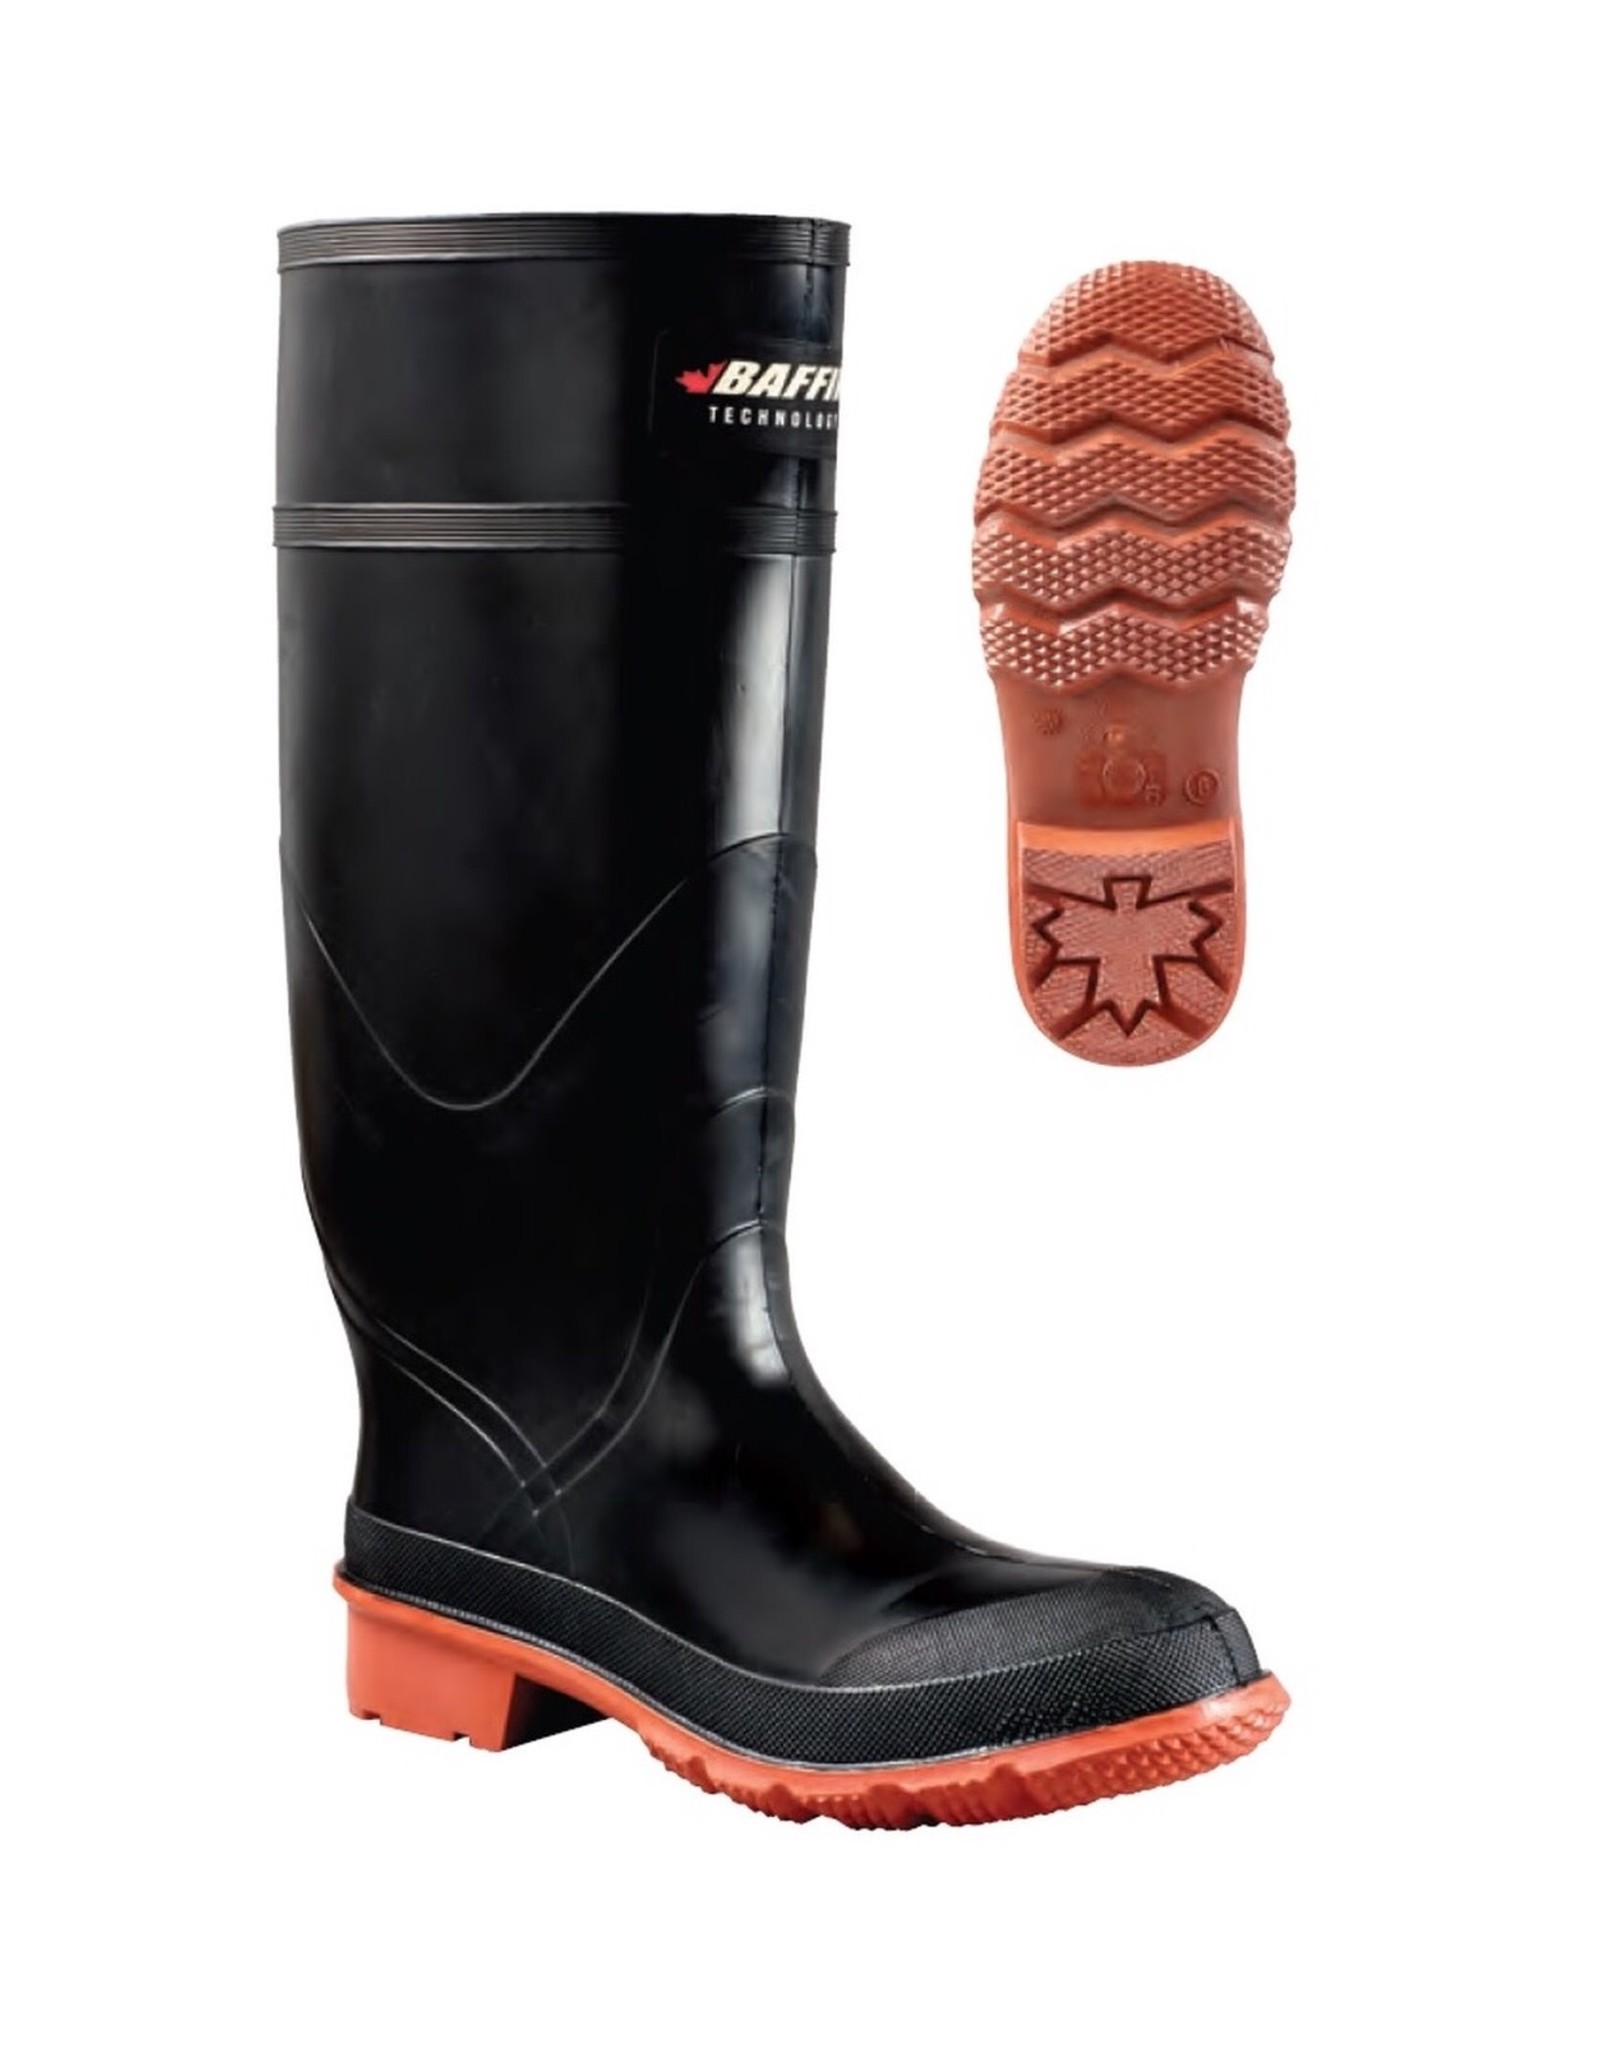 Baffin Baffin Tractor Rubber Boots Men's